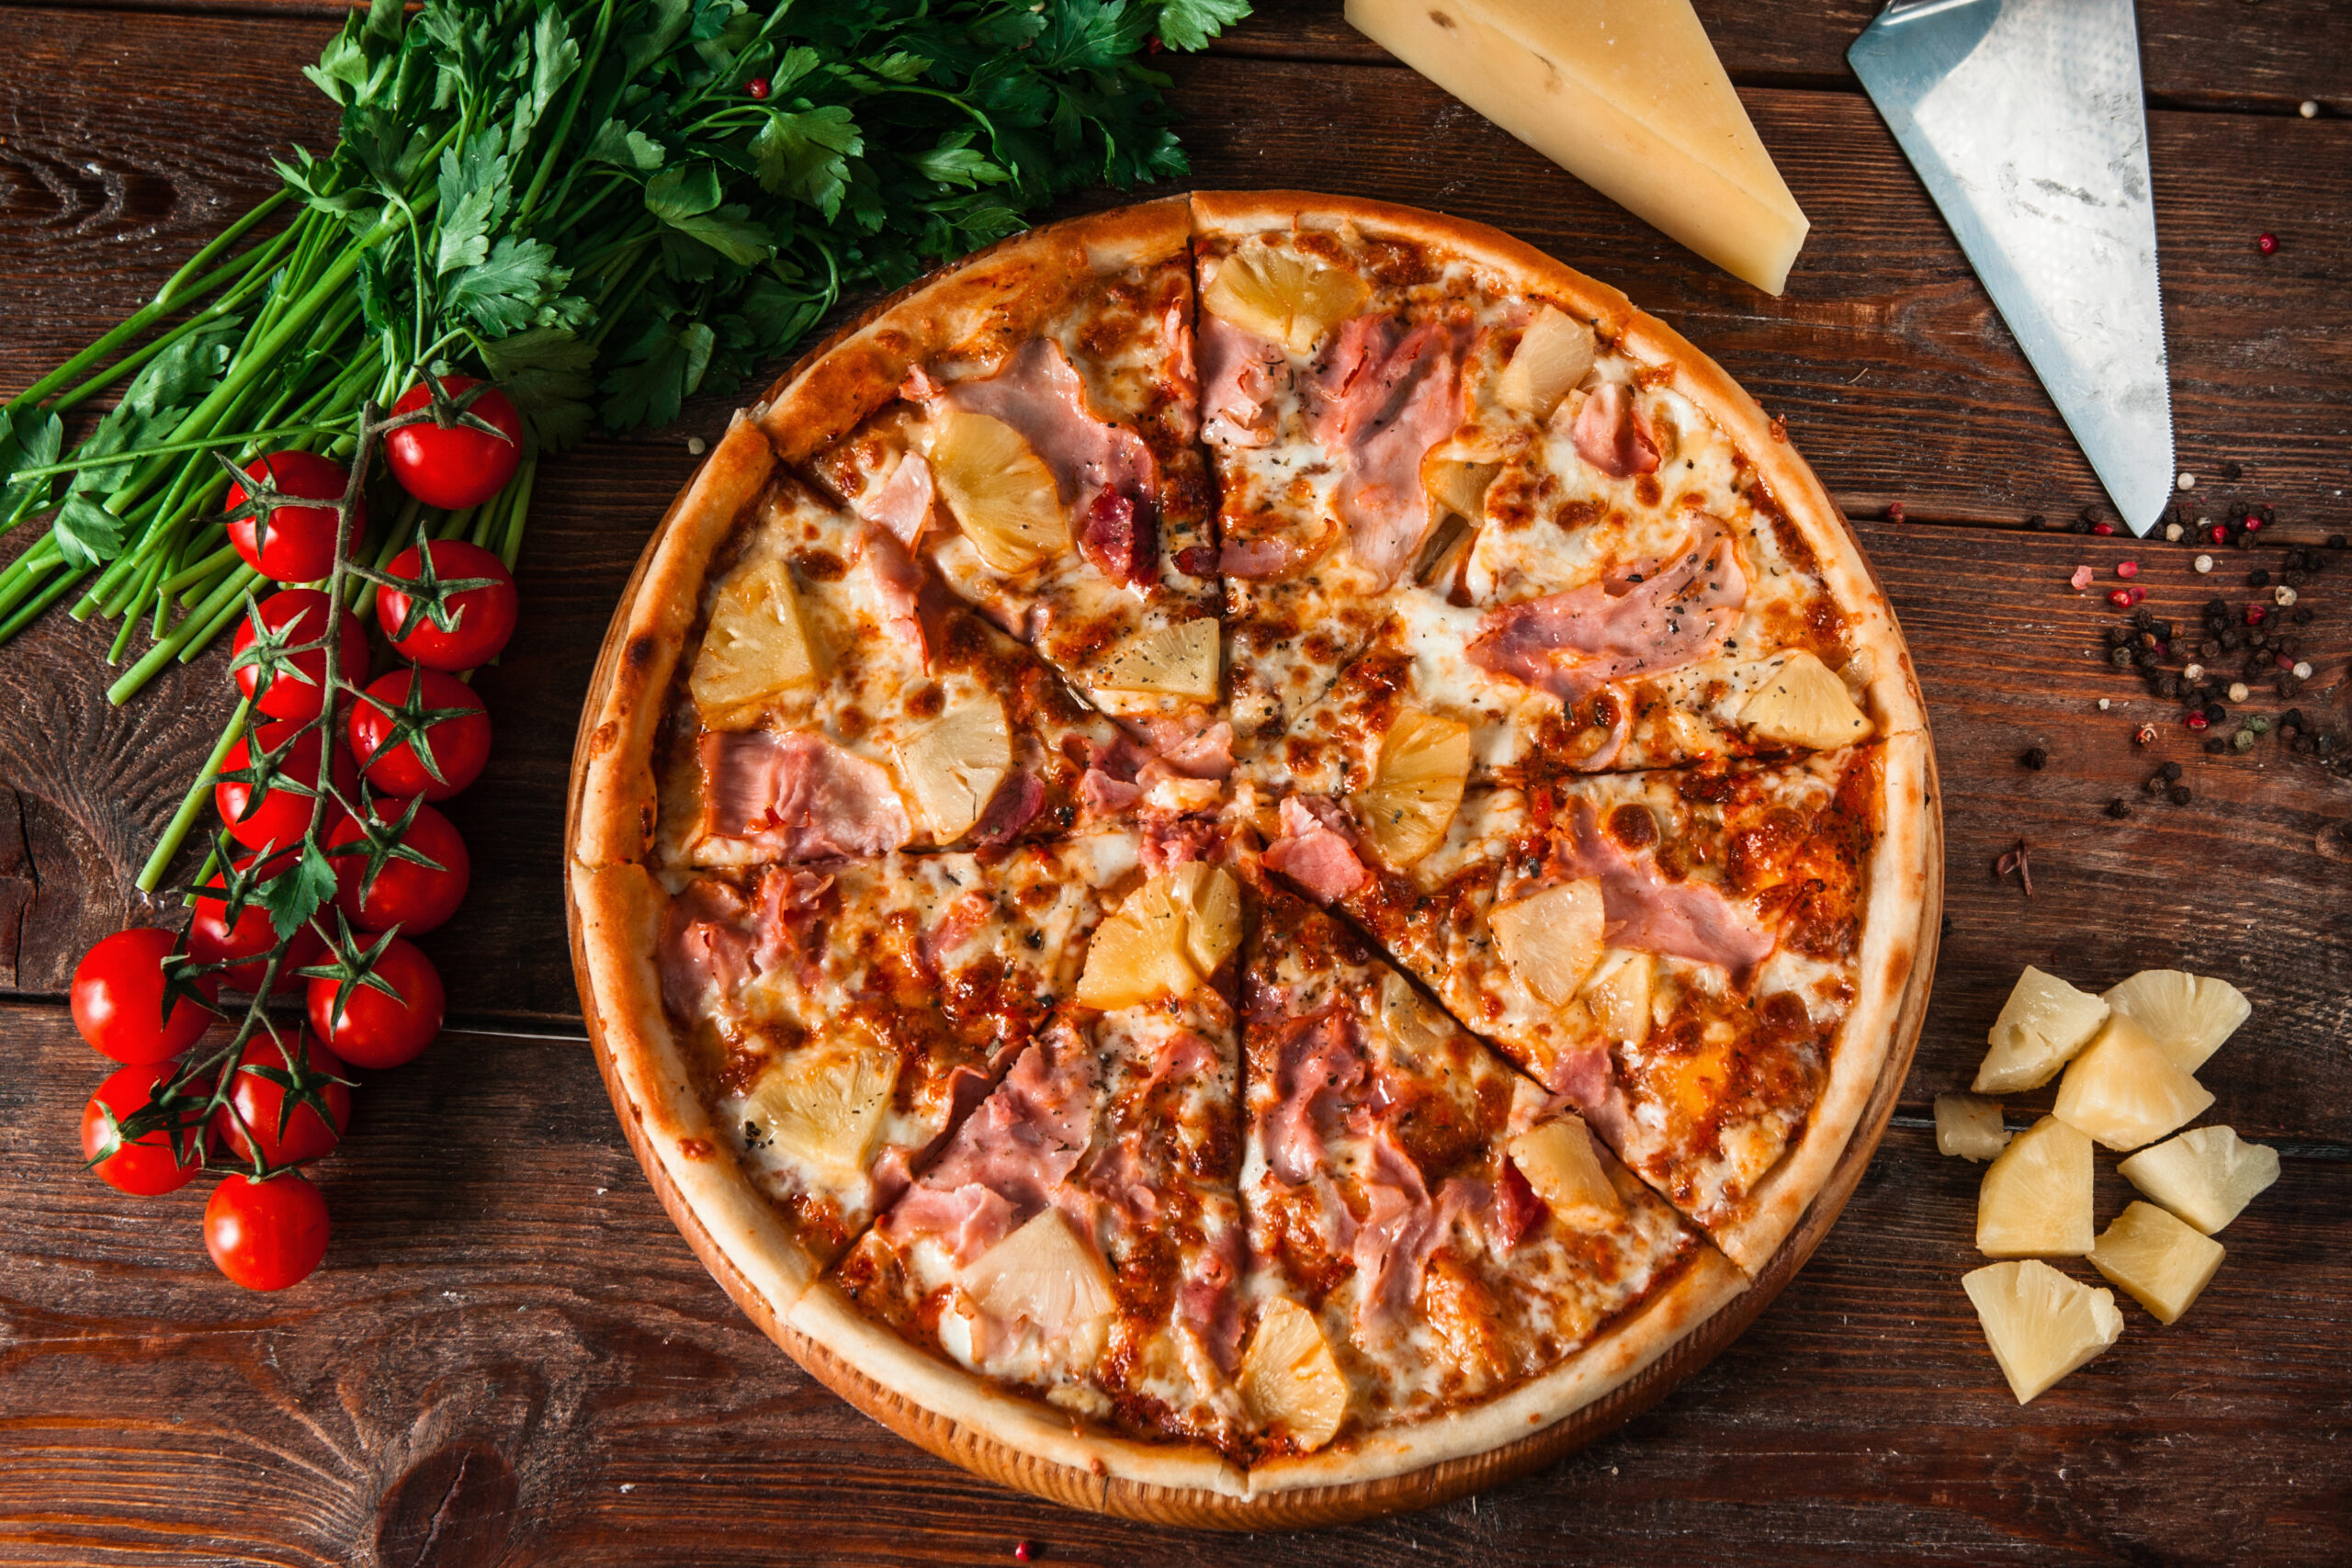 Hawaiian Pizza Recipe: How to Make the Classic Pizza with Pineapple and Ham